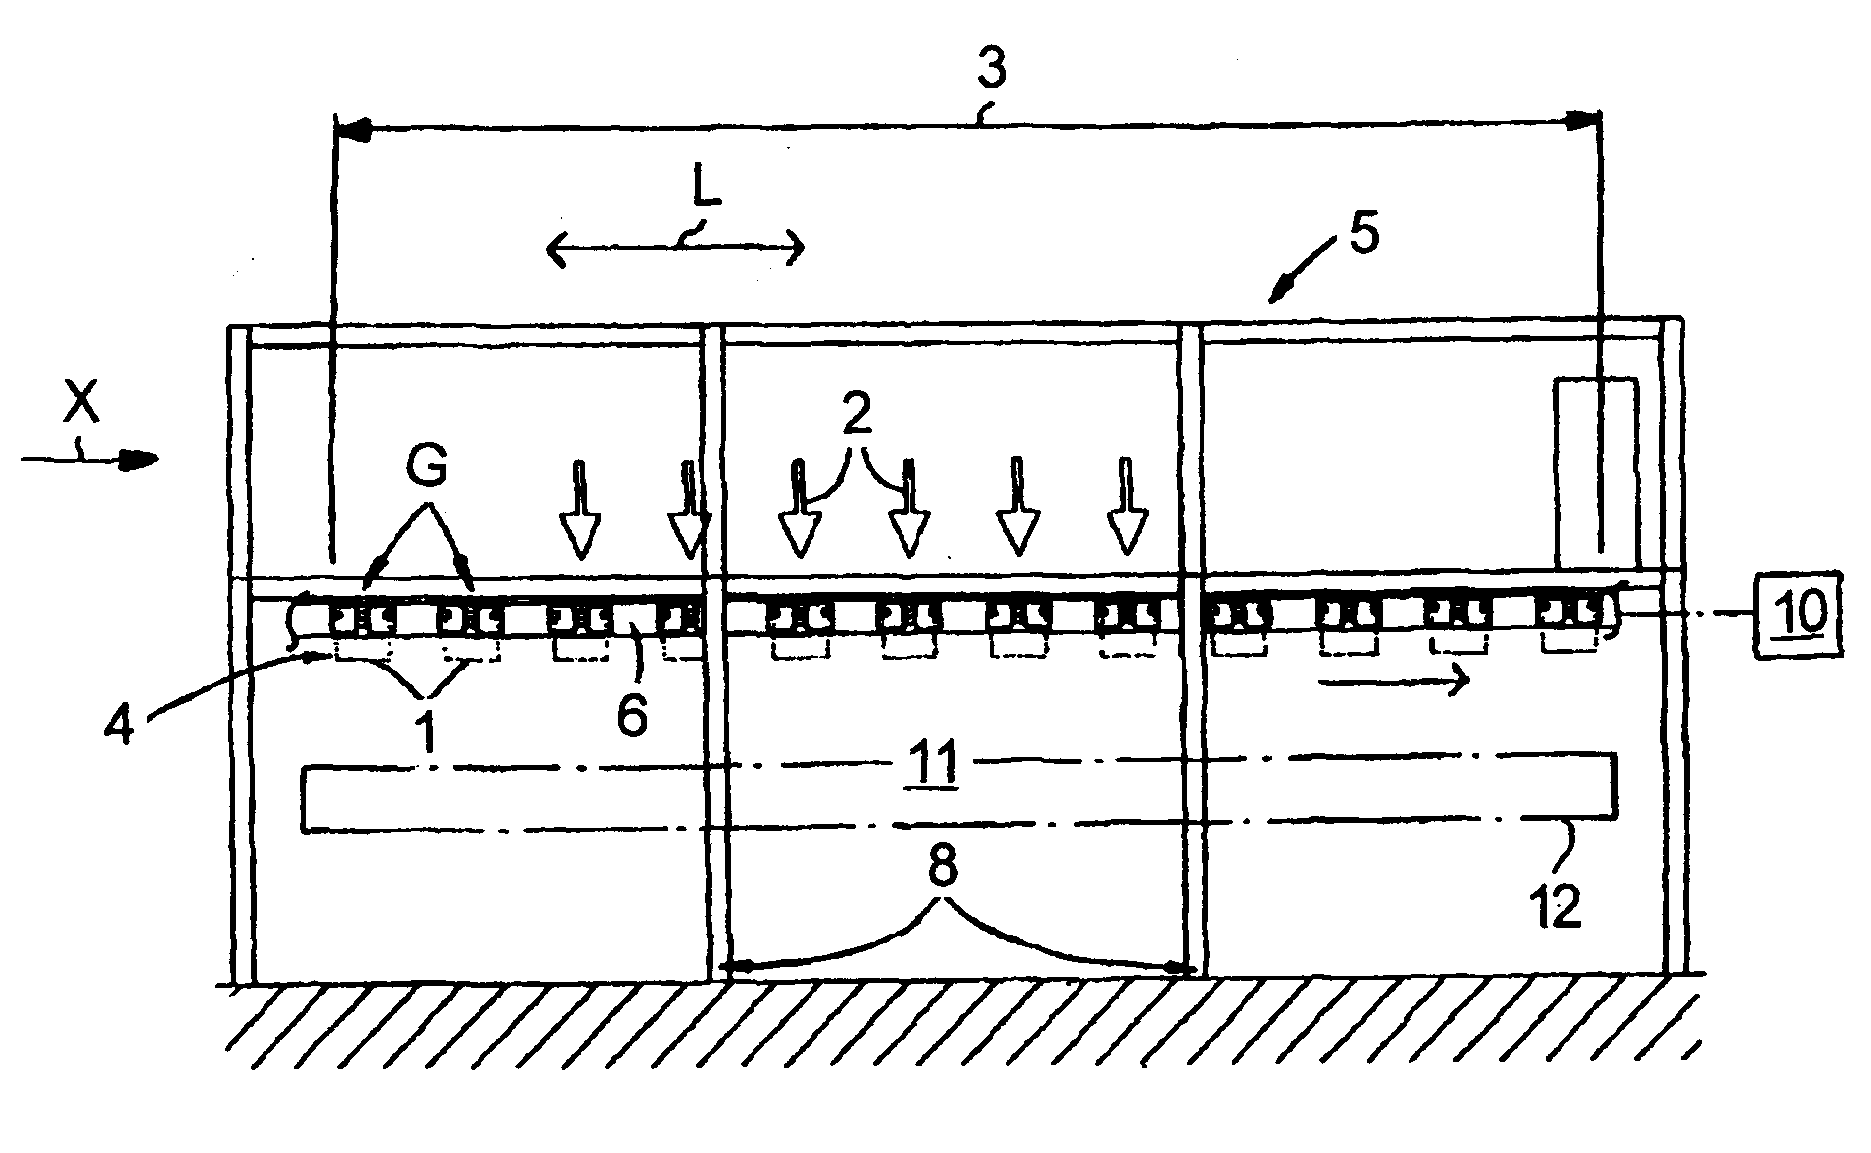 Apparatus for the filling of bags having at least one opening therein and having space to permit decreased accumulation of filling materials